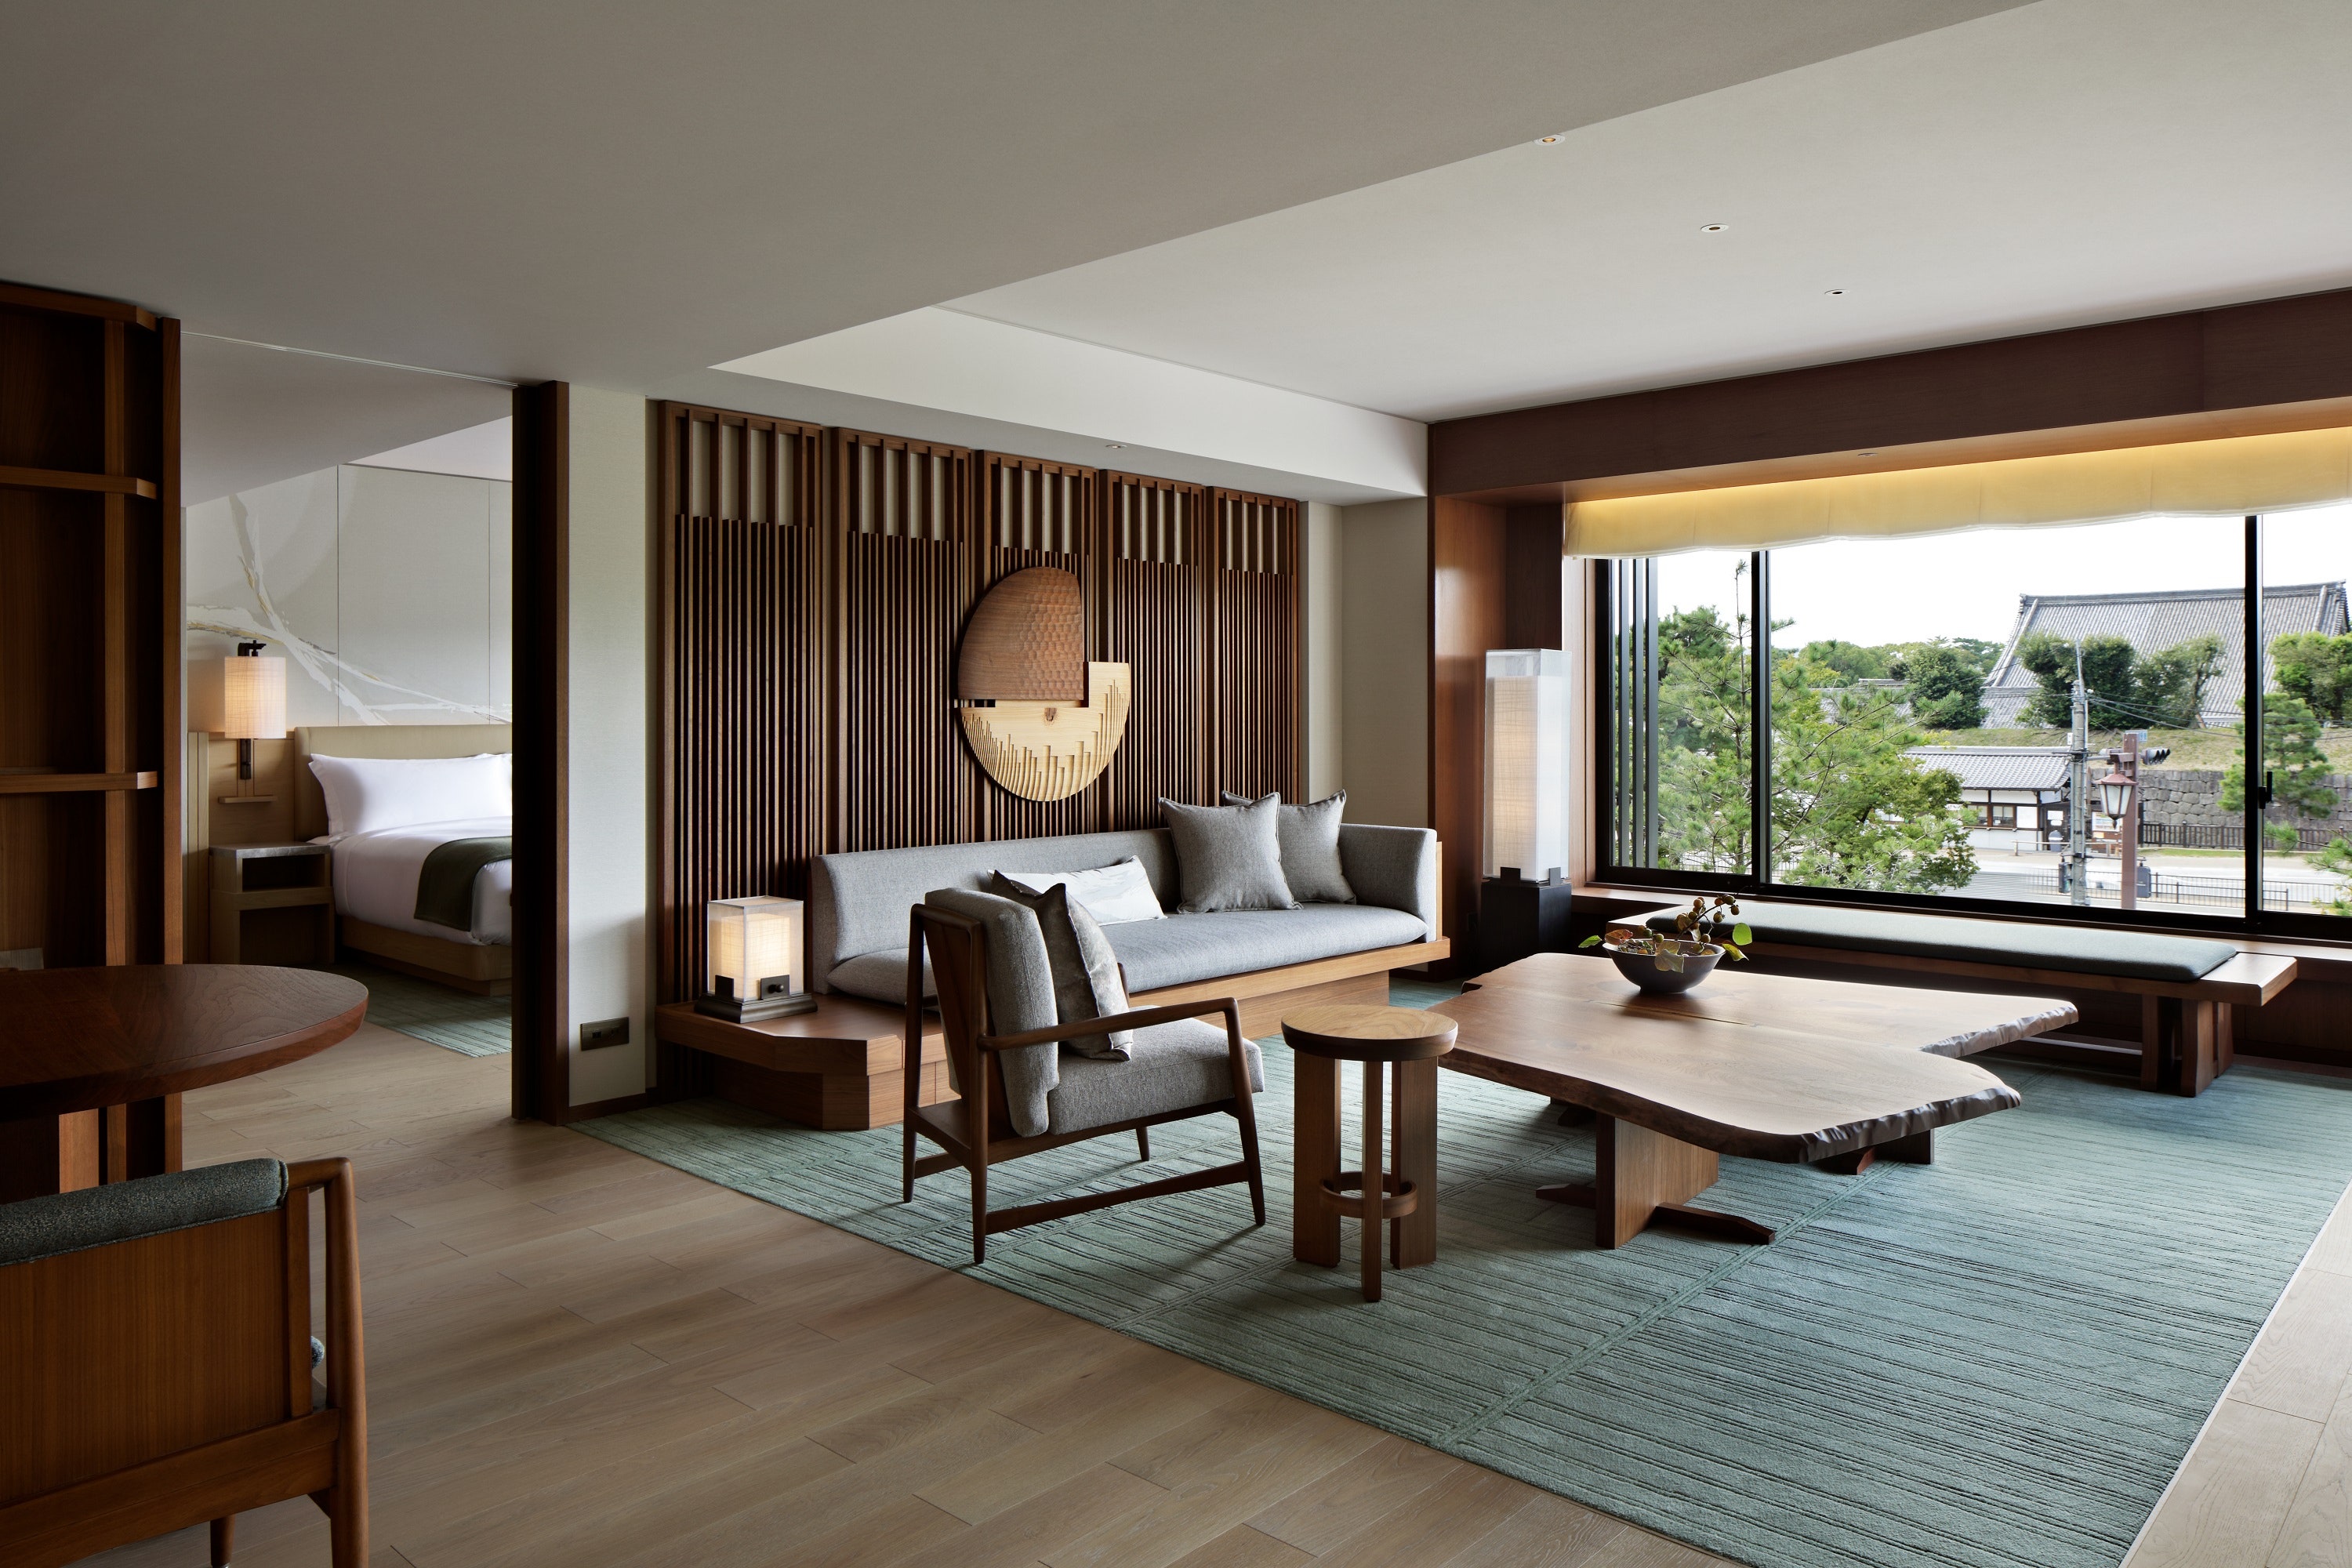 <p>In the middle of Japan’s “cultural capital,” the all-star design team behind <a href="https://www.hotelthemitsui.com/en/kyoto/">Hotel the Mitsui Kyoto</a>’s spared no energy in honoring the city’s extensive history. From the tastefully displayed work by local artists, to the 14,000-square foot traditional Japanese garden, private Onsen facilities, and nature-inspired design, the hotel acts as both a respite and enriching educational experience for any traveler. With interiors designed by André Fu, expect to find calming, streamlined guest rooms that honor the Japanese aesthetic of simplicity and serenity.</p> <p>While at the property, guests can take advantage of a number of cultural activities, including a traditional tea ceremony, lantern-led art tour, and wellness breathing session. In the basement, you’ll find the hotel’s spa, which features a rock-walled thermal spring, two private onsens, and additional treatment rooms offering various services based on the traditional Japanese Anma massage. More alluring yet, Hotel the Mitsui Kyoto is in a seductive location by any architecture fans’ standard: directly across the street from Nijō-jo Castle, with some rooms even offering direct views to the 17th Century UNESCO World Heritage Site.</p> <p><em><a href="https://cna.st/affiliate-link/2rQwPprcmtWkDUJMJHVJ5ijo8qZo3vWcMYnHNGdE7wCTiGjAcWs48B23JX61TmN1ib41VkALCZ8kqEQTL1PnHDwEXs2MJ3reSMAWcdHggZWP8w9EUe5Wi4wK7TBZww2vBjF9jWBXBWrqxcAMte7voF1Y4oNcz1cZL5ka68G8N4gYuQZEm5ZyGWYvUDzpHDz8R" rel="sponsored">Book now</a>.</em></p><p>Sign up for our newsletter to get the latest in design, decorating, celebrity style, shopping, and more.</p><a href="https://www.architecturaldigest.com/newsletter/subscribe?sourceCode=msnsend">Sign Up Now</a>